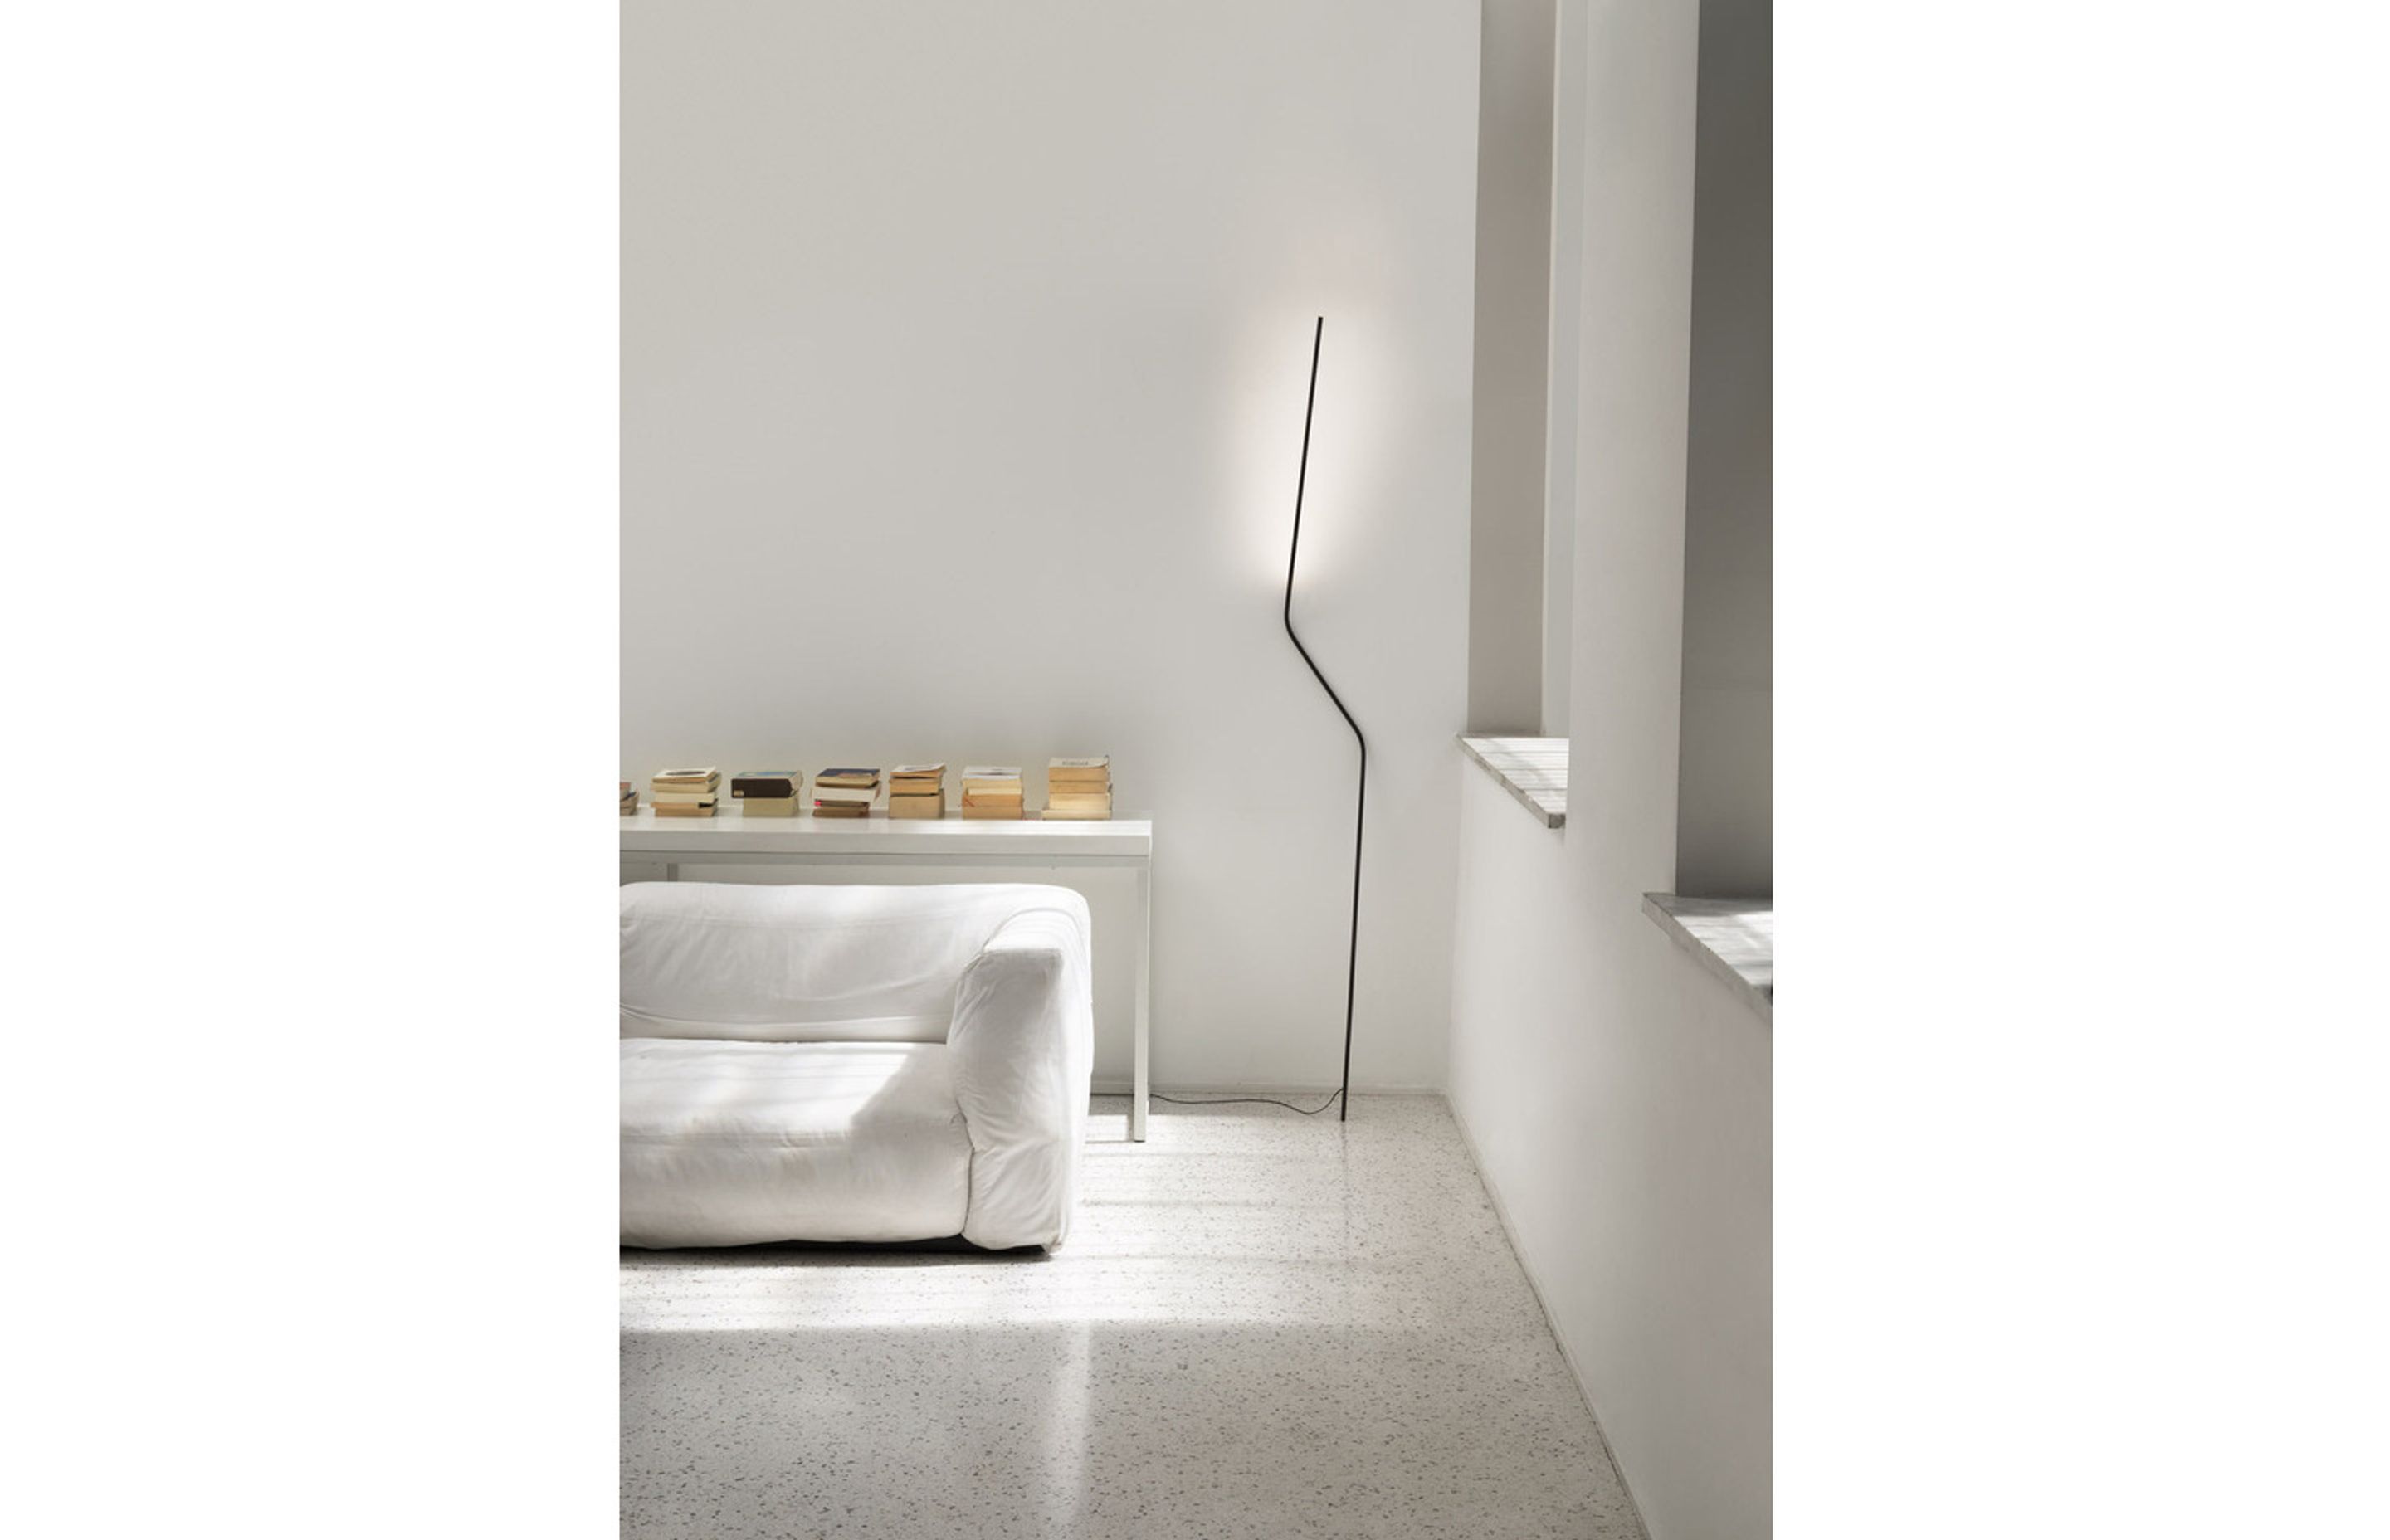 While it may look like it will topple over, the Neo Floor Lamp unique design ensures its stability.